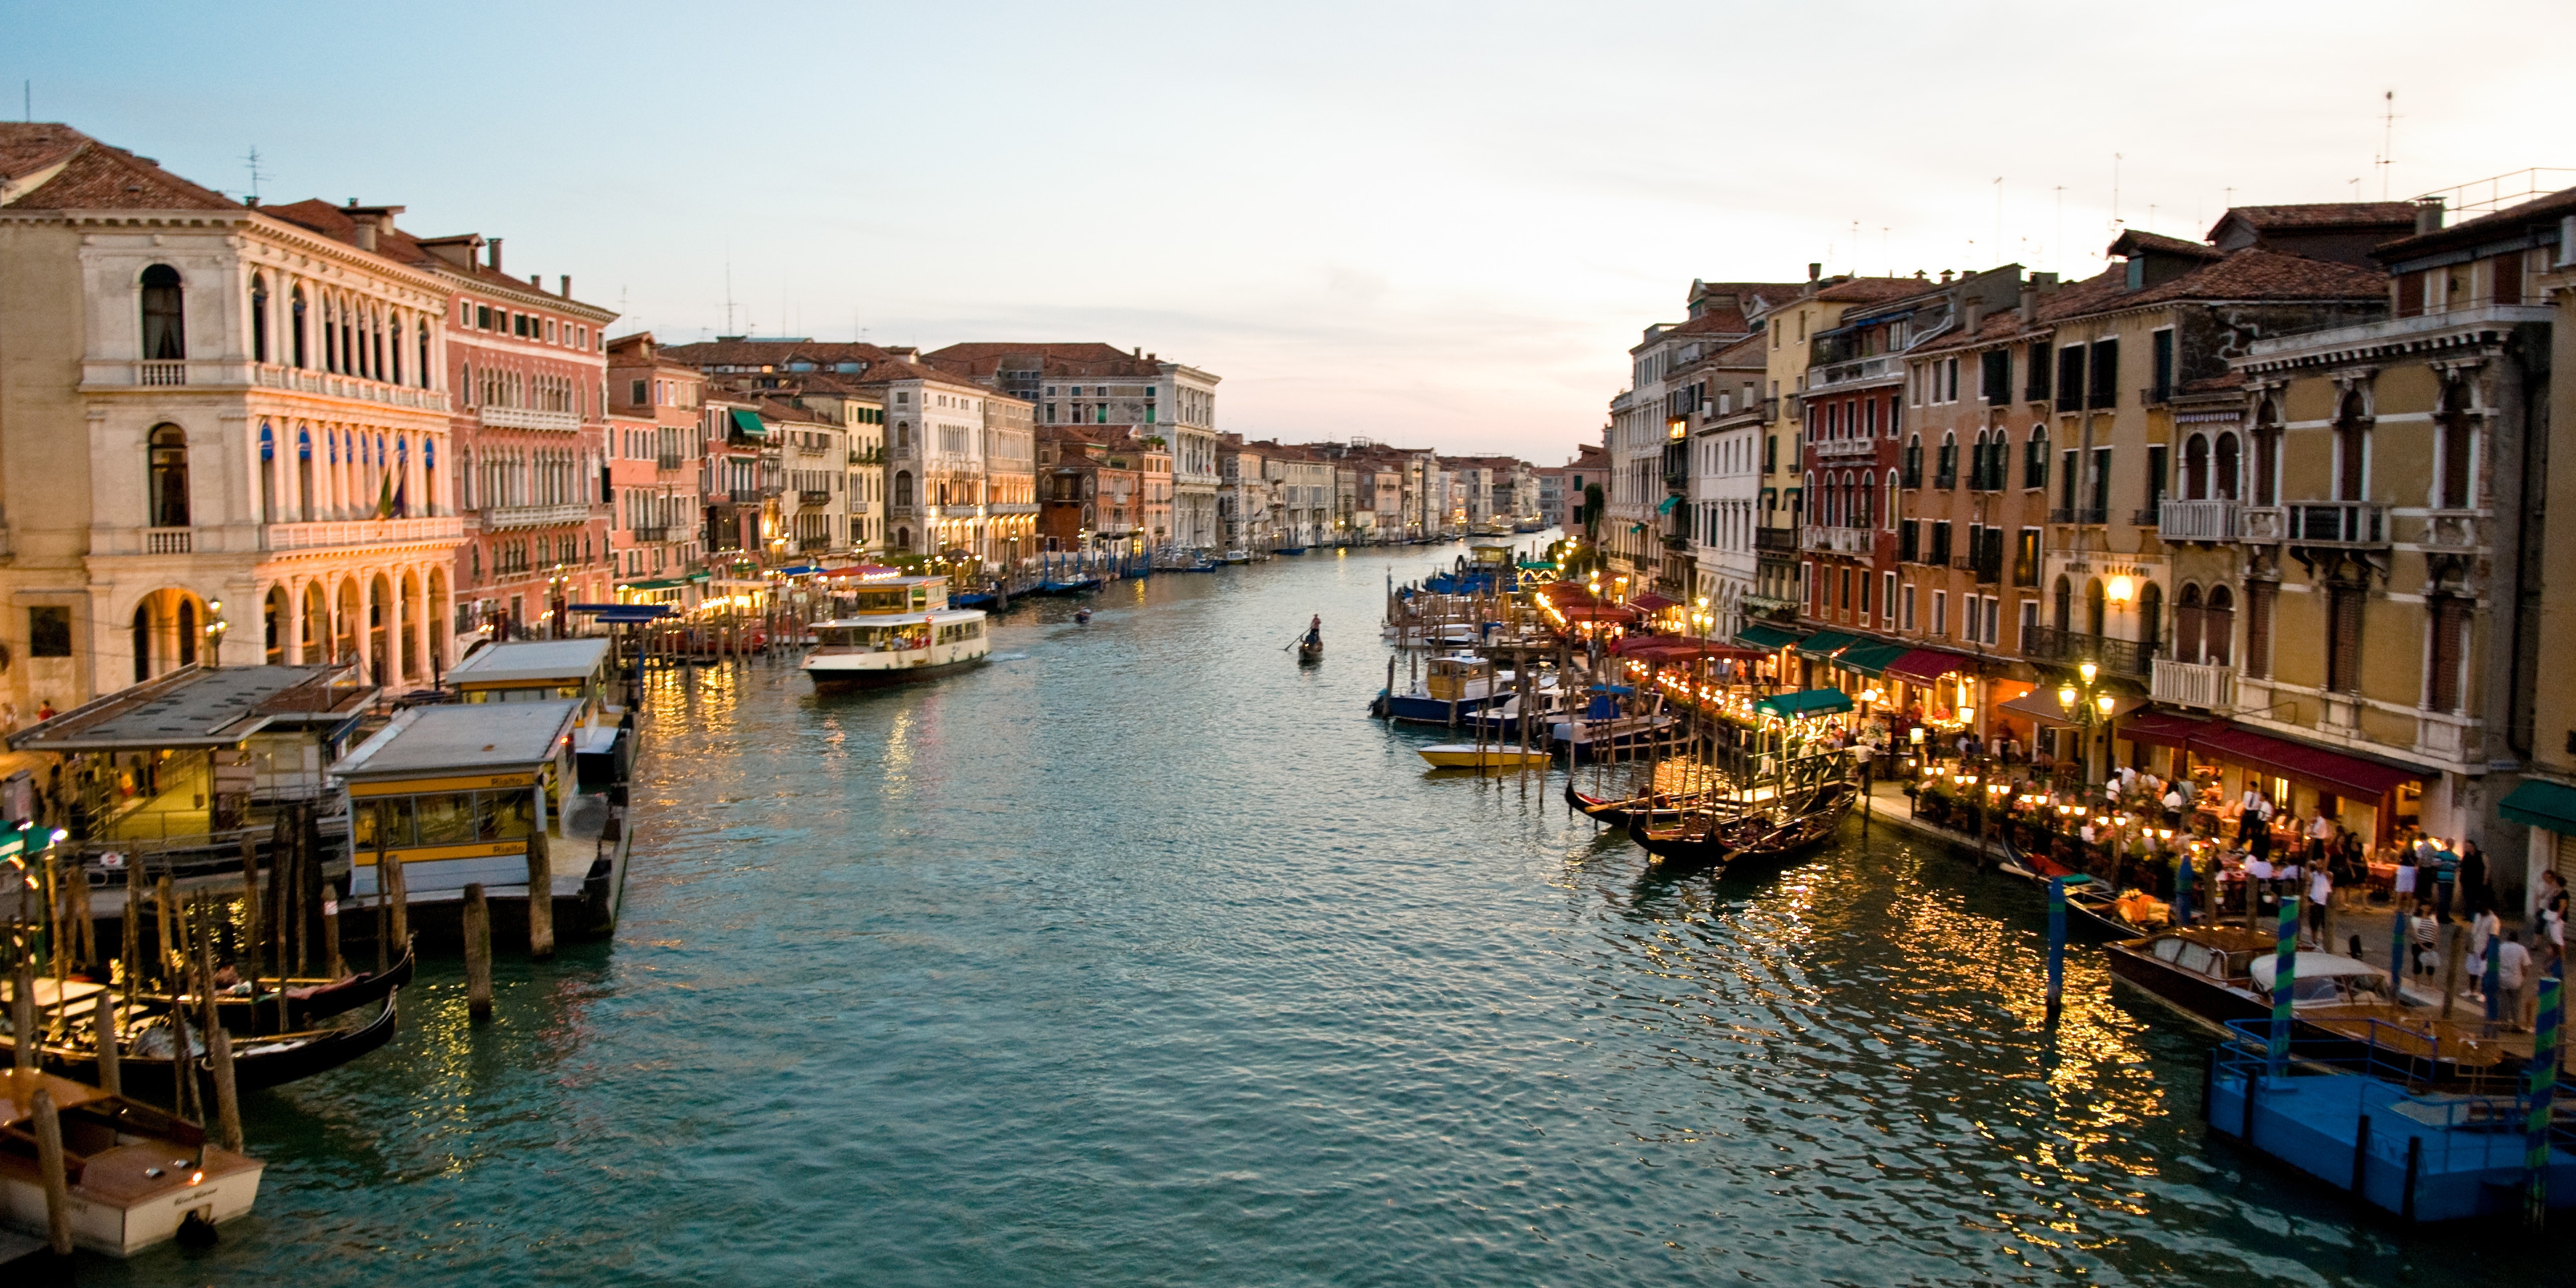 Popular Venice images for mobile phone